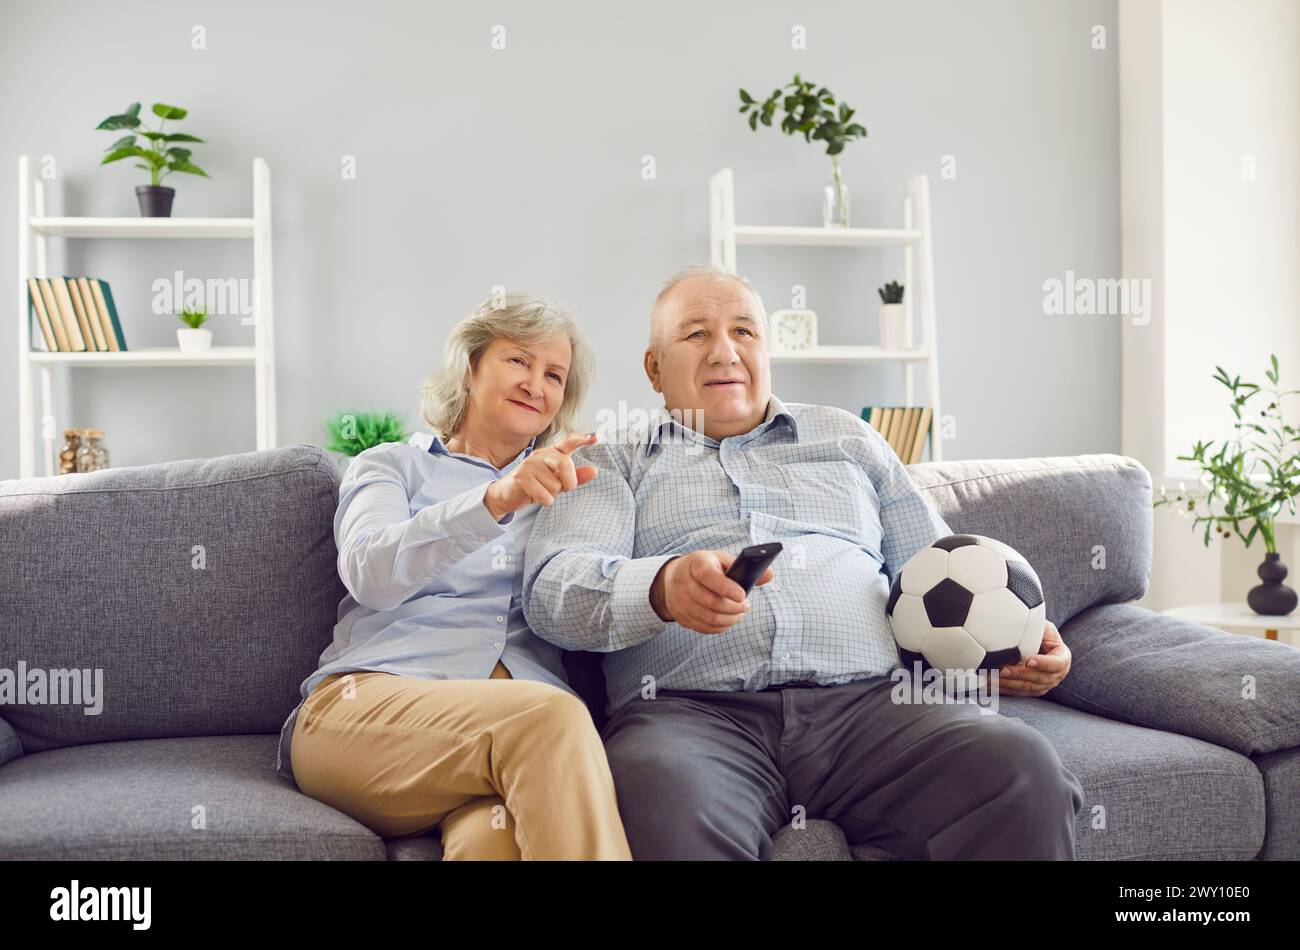 Elderly Family Couple Watching Football Match Together On Tv Stock Photo